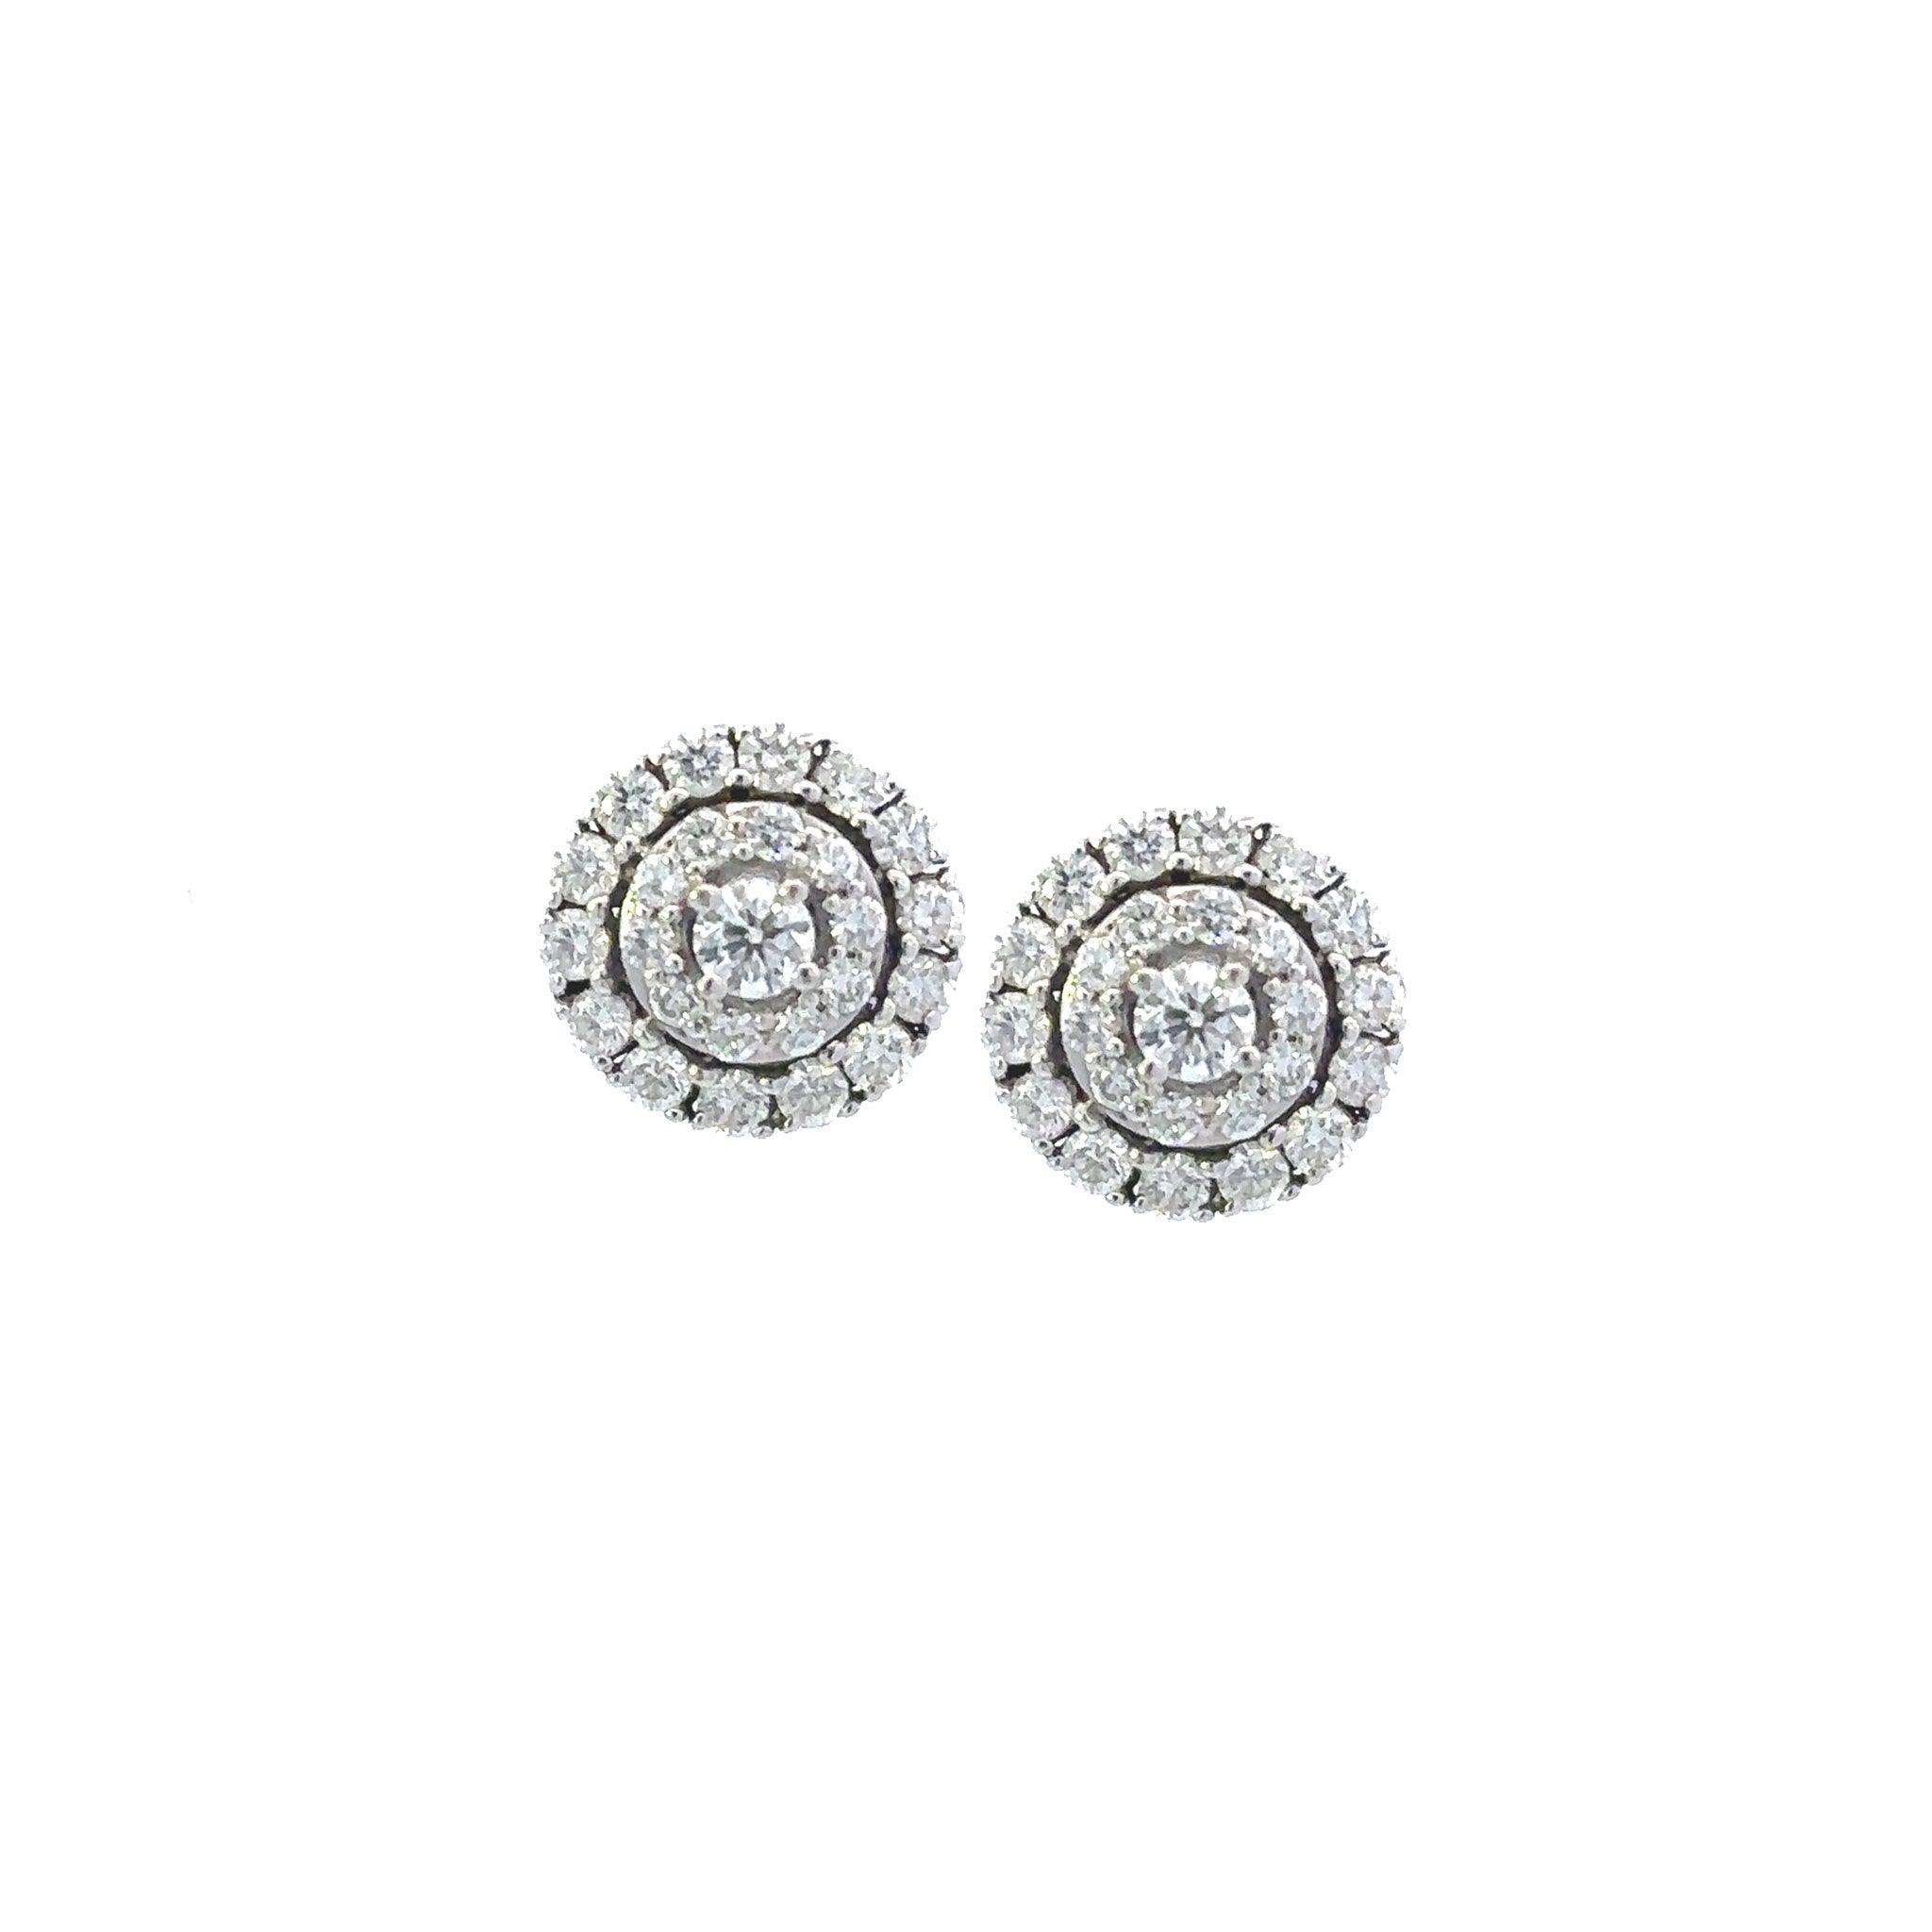 Penny Preville Pave Diamond Stud Earrings - Be On Park